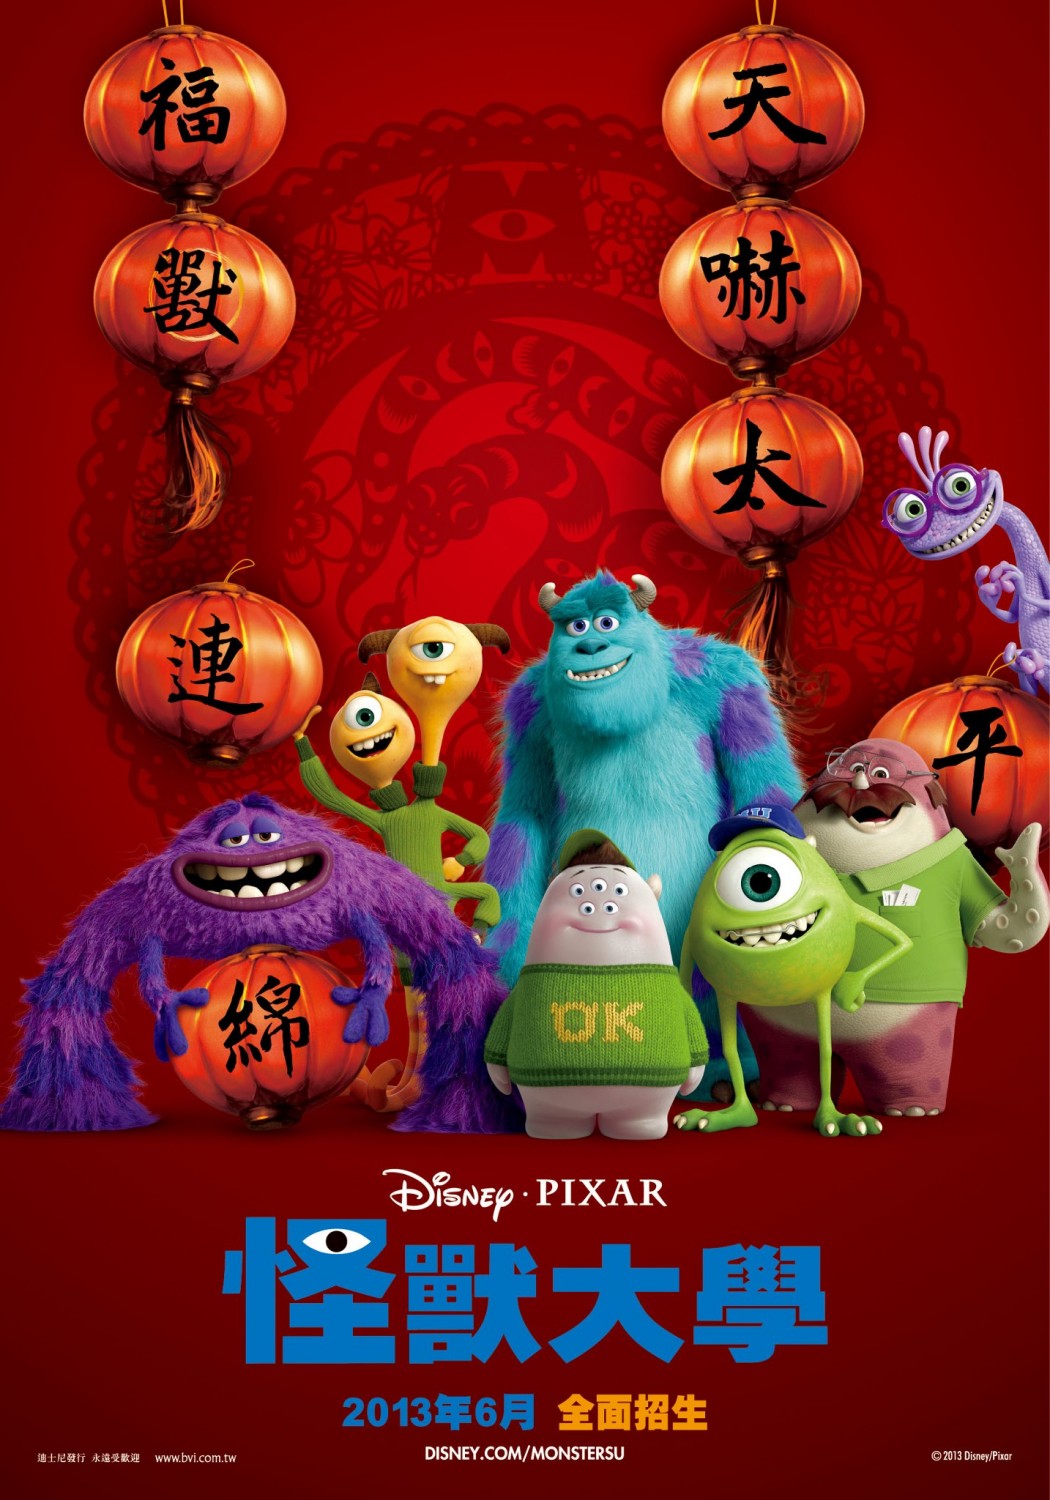 Extra Large Movie Poster Image for Monsters University (#10 of 21)